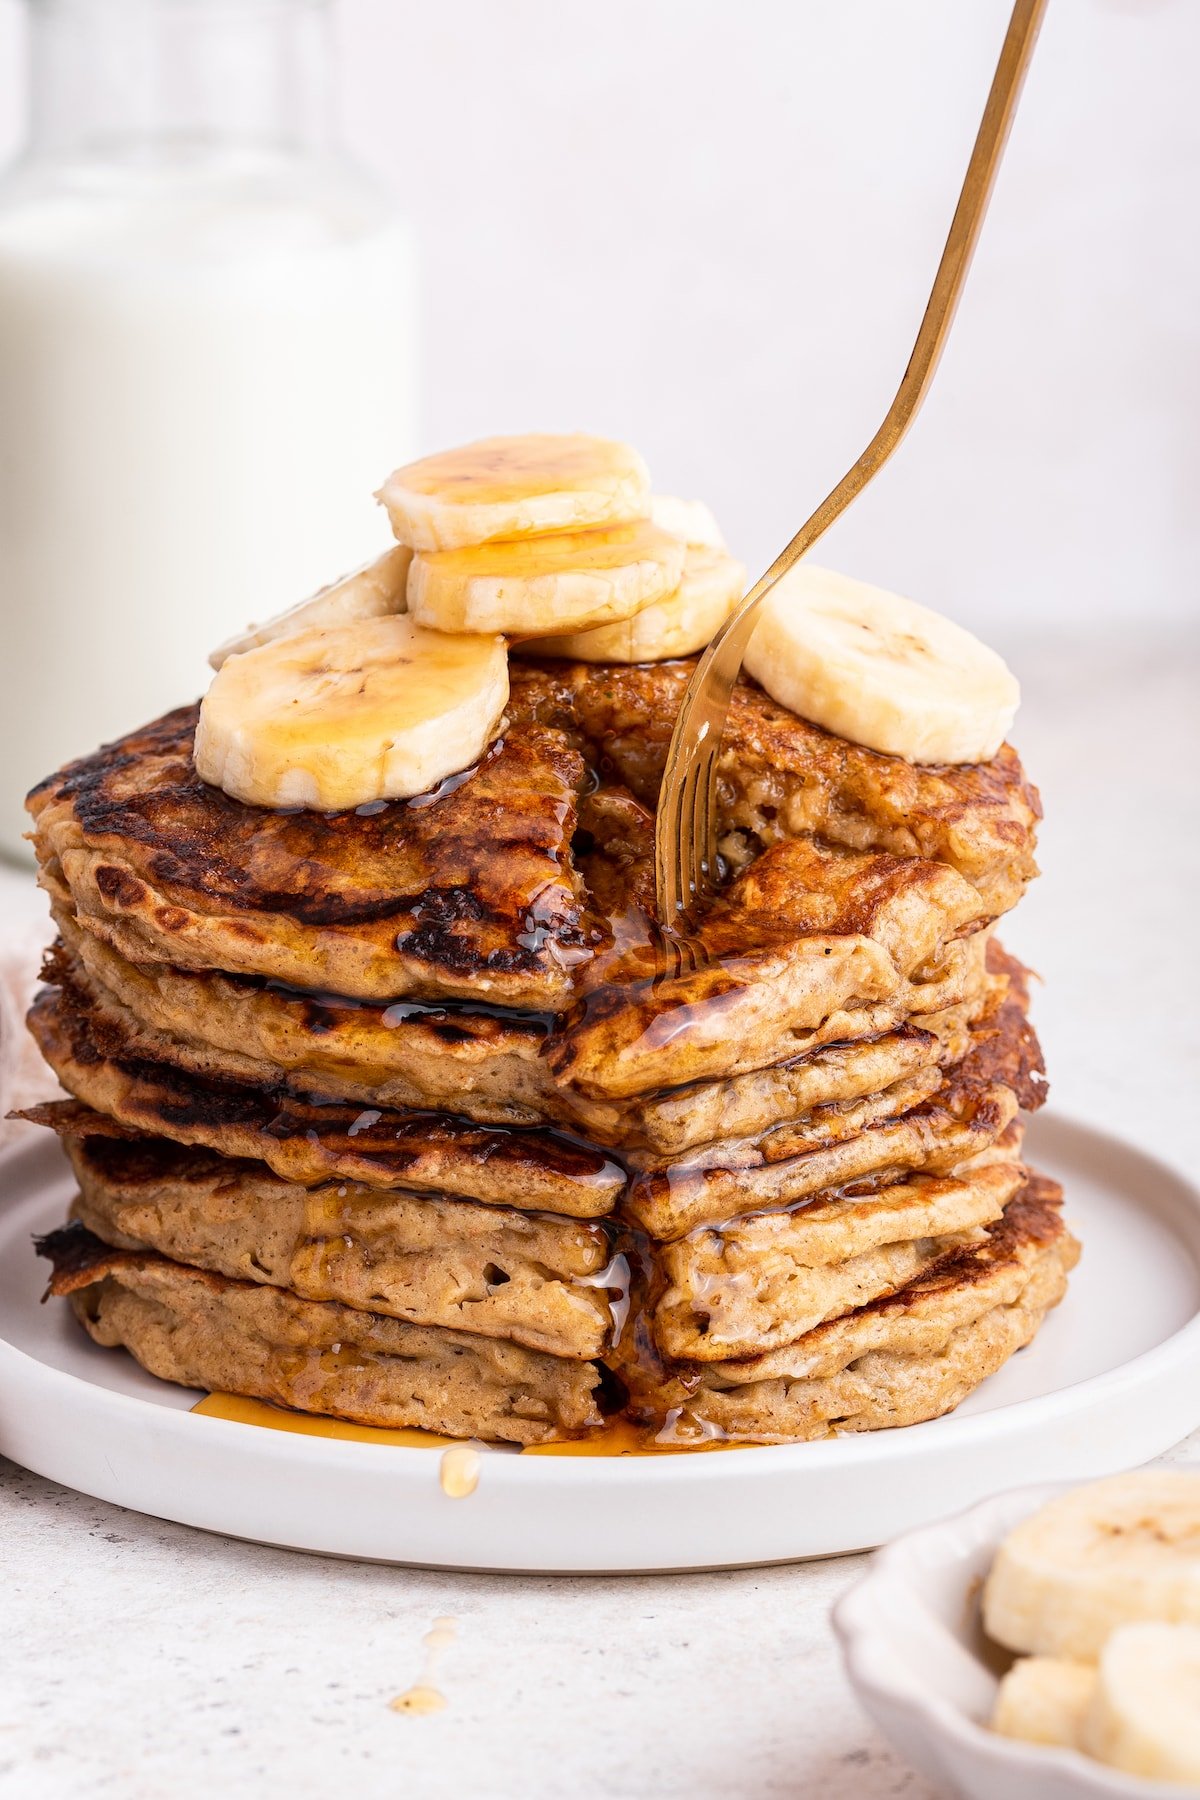 A fork digging into a large portion of a stack of multiple overnight oatmeal pancakes that are topped with banana slices and maple syrup.